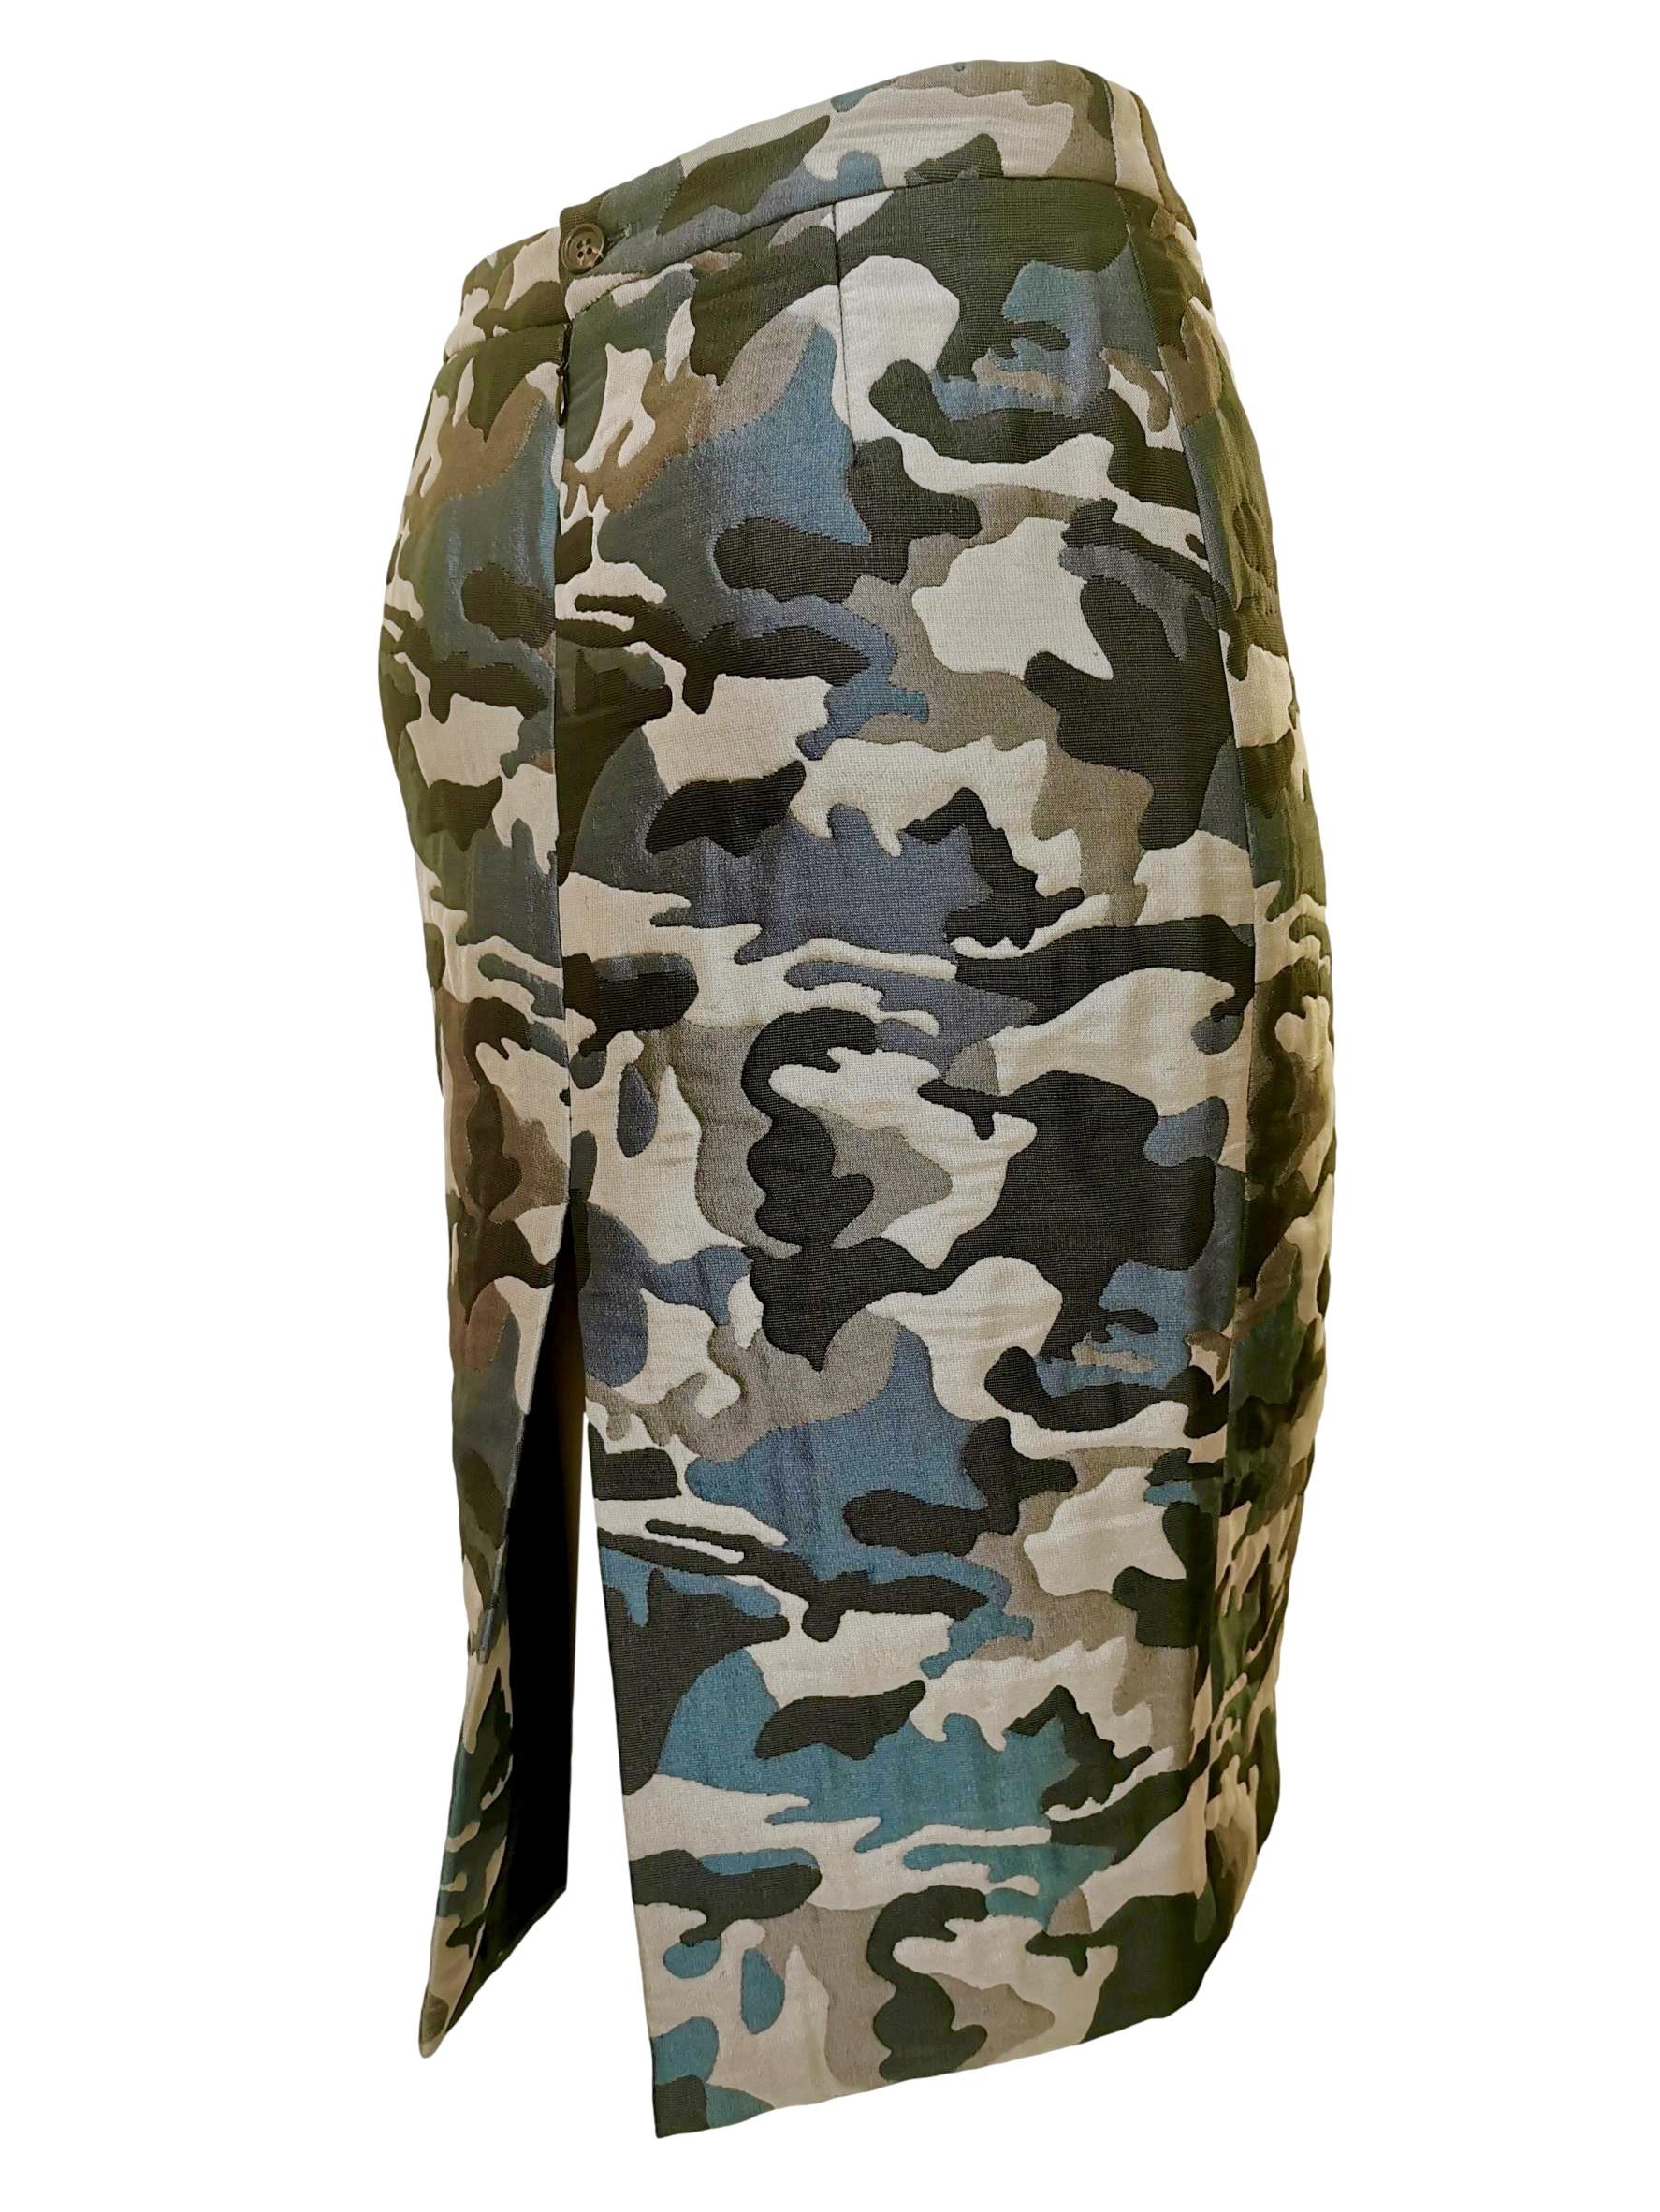 Alexander McQueen Vintage 1990's Quilted Camouflage Fitted Skirt  In Excellent Condition For Sale In Bath, GB